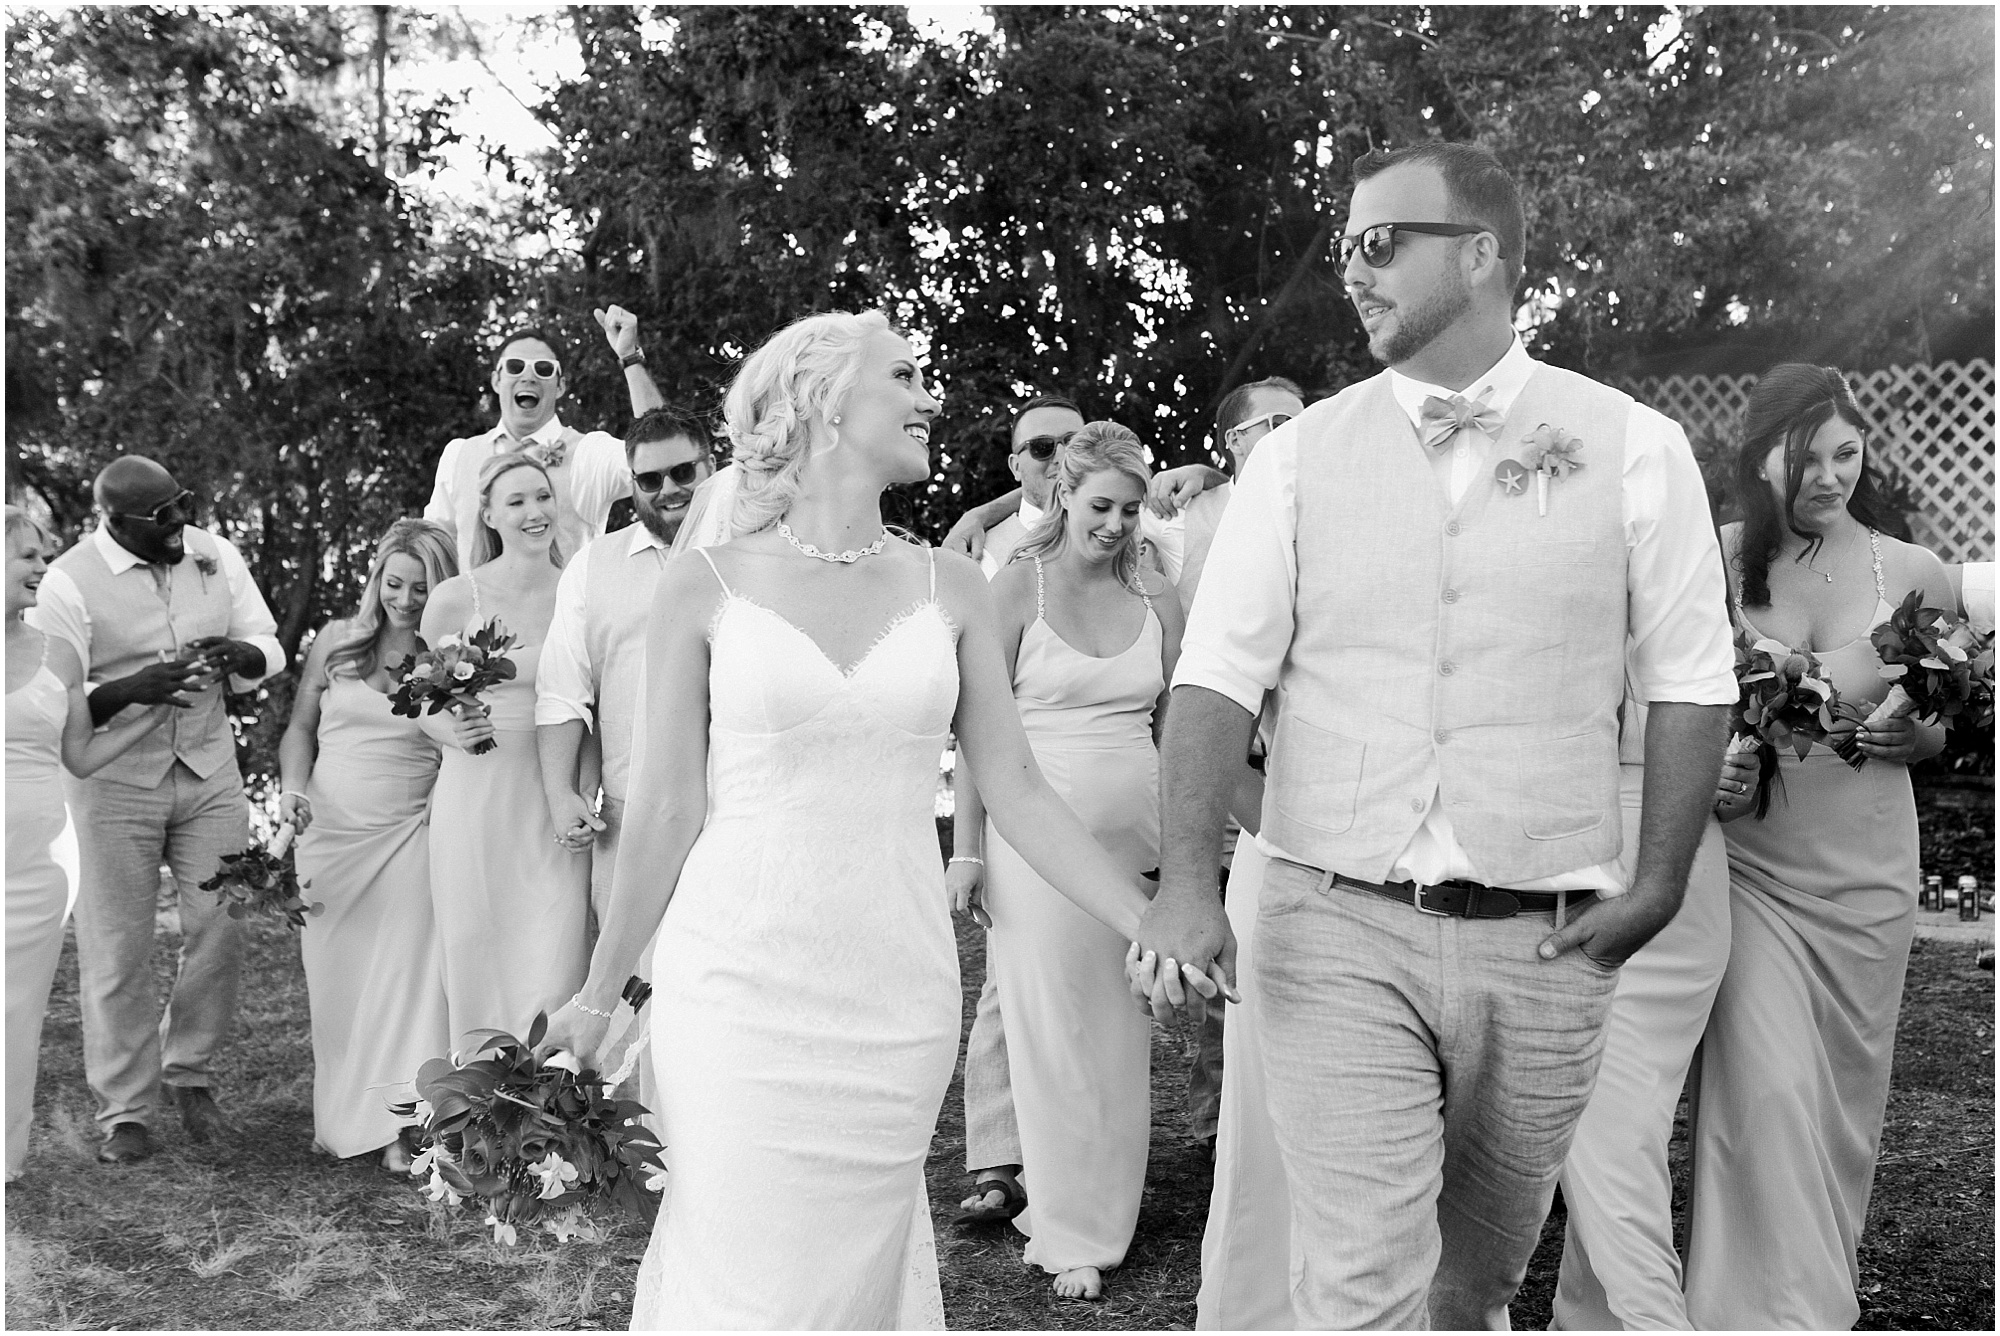 Black and white photo of bride and groom walking with their wedding party.